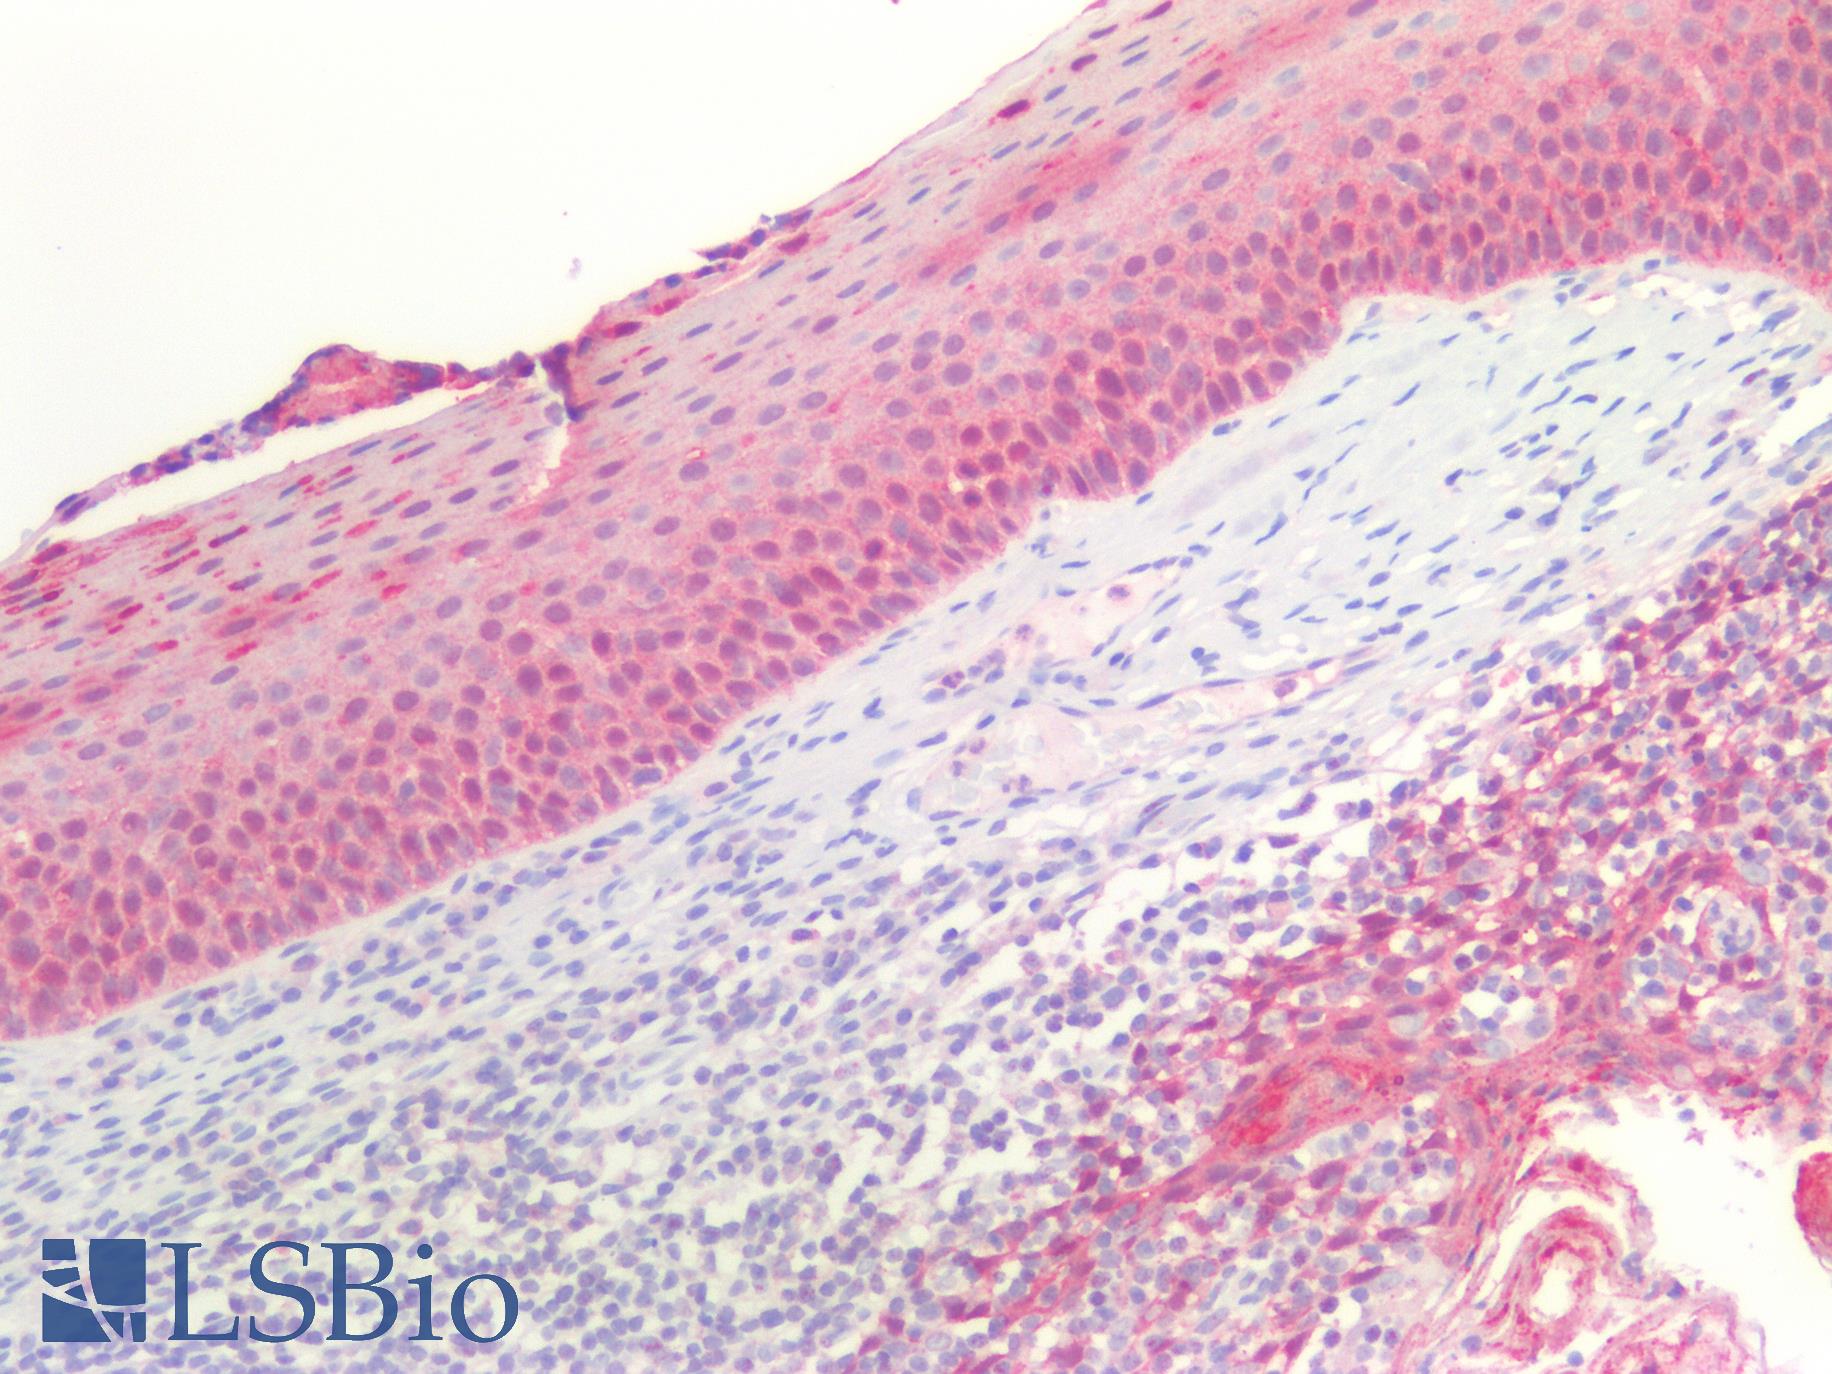 SFN / Stratifin / 14-3-3 Sigma Antibody - Human Tonsil, Squamous: Formalin-Fixed, Paraffin-Embedded (FFPE)